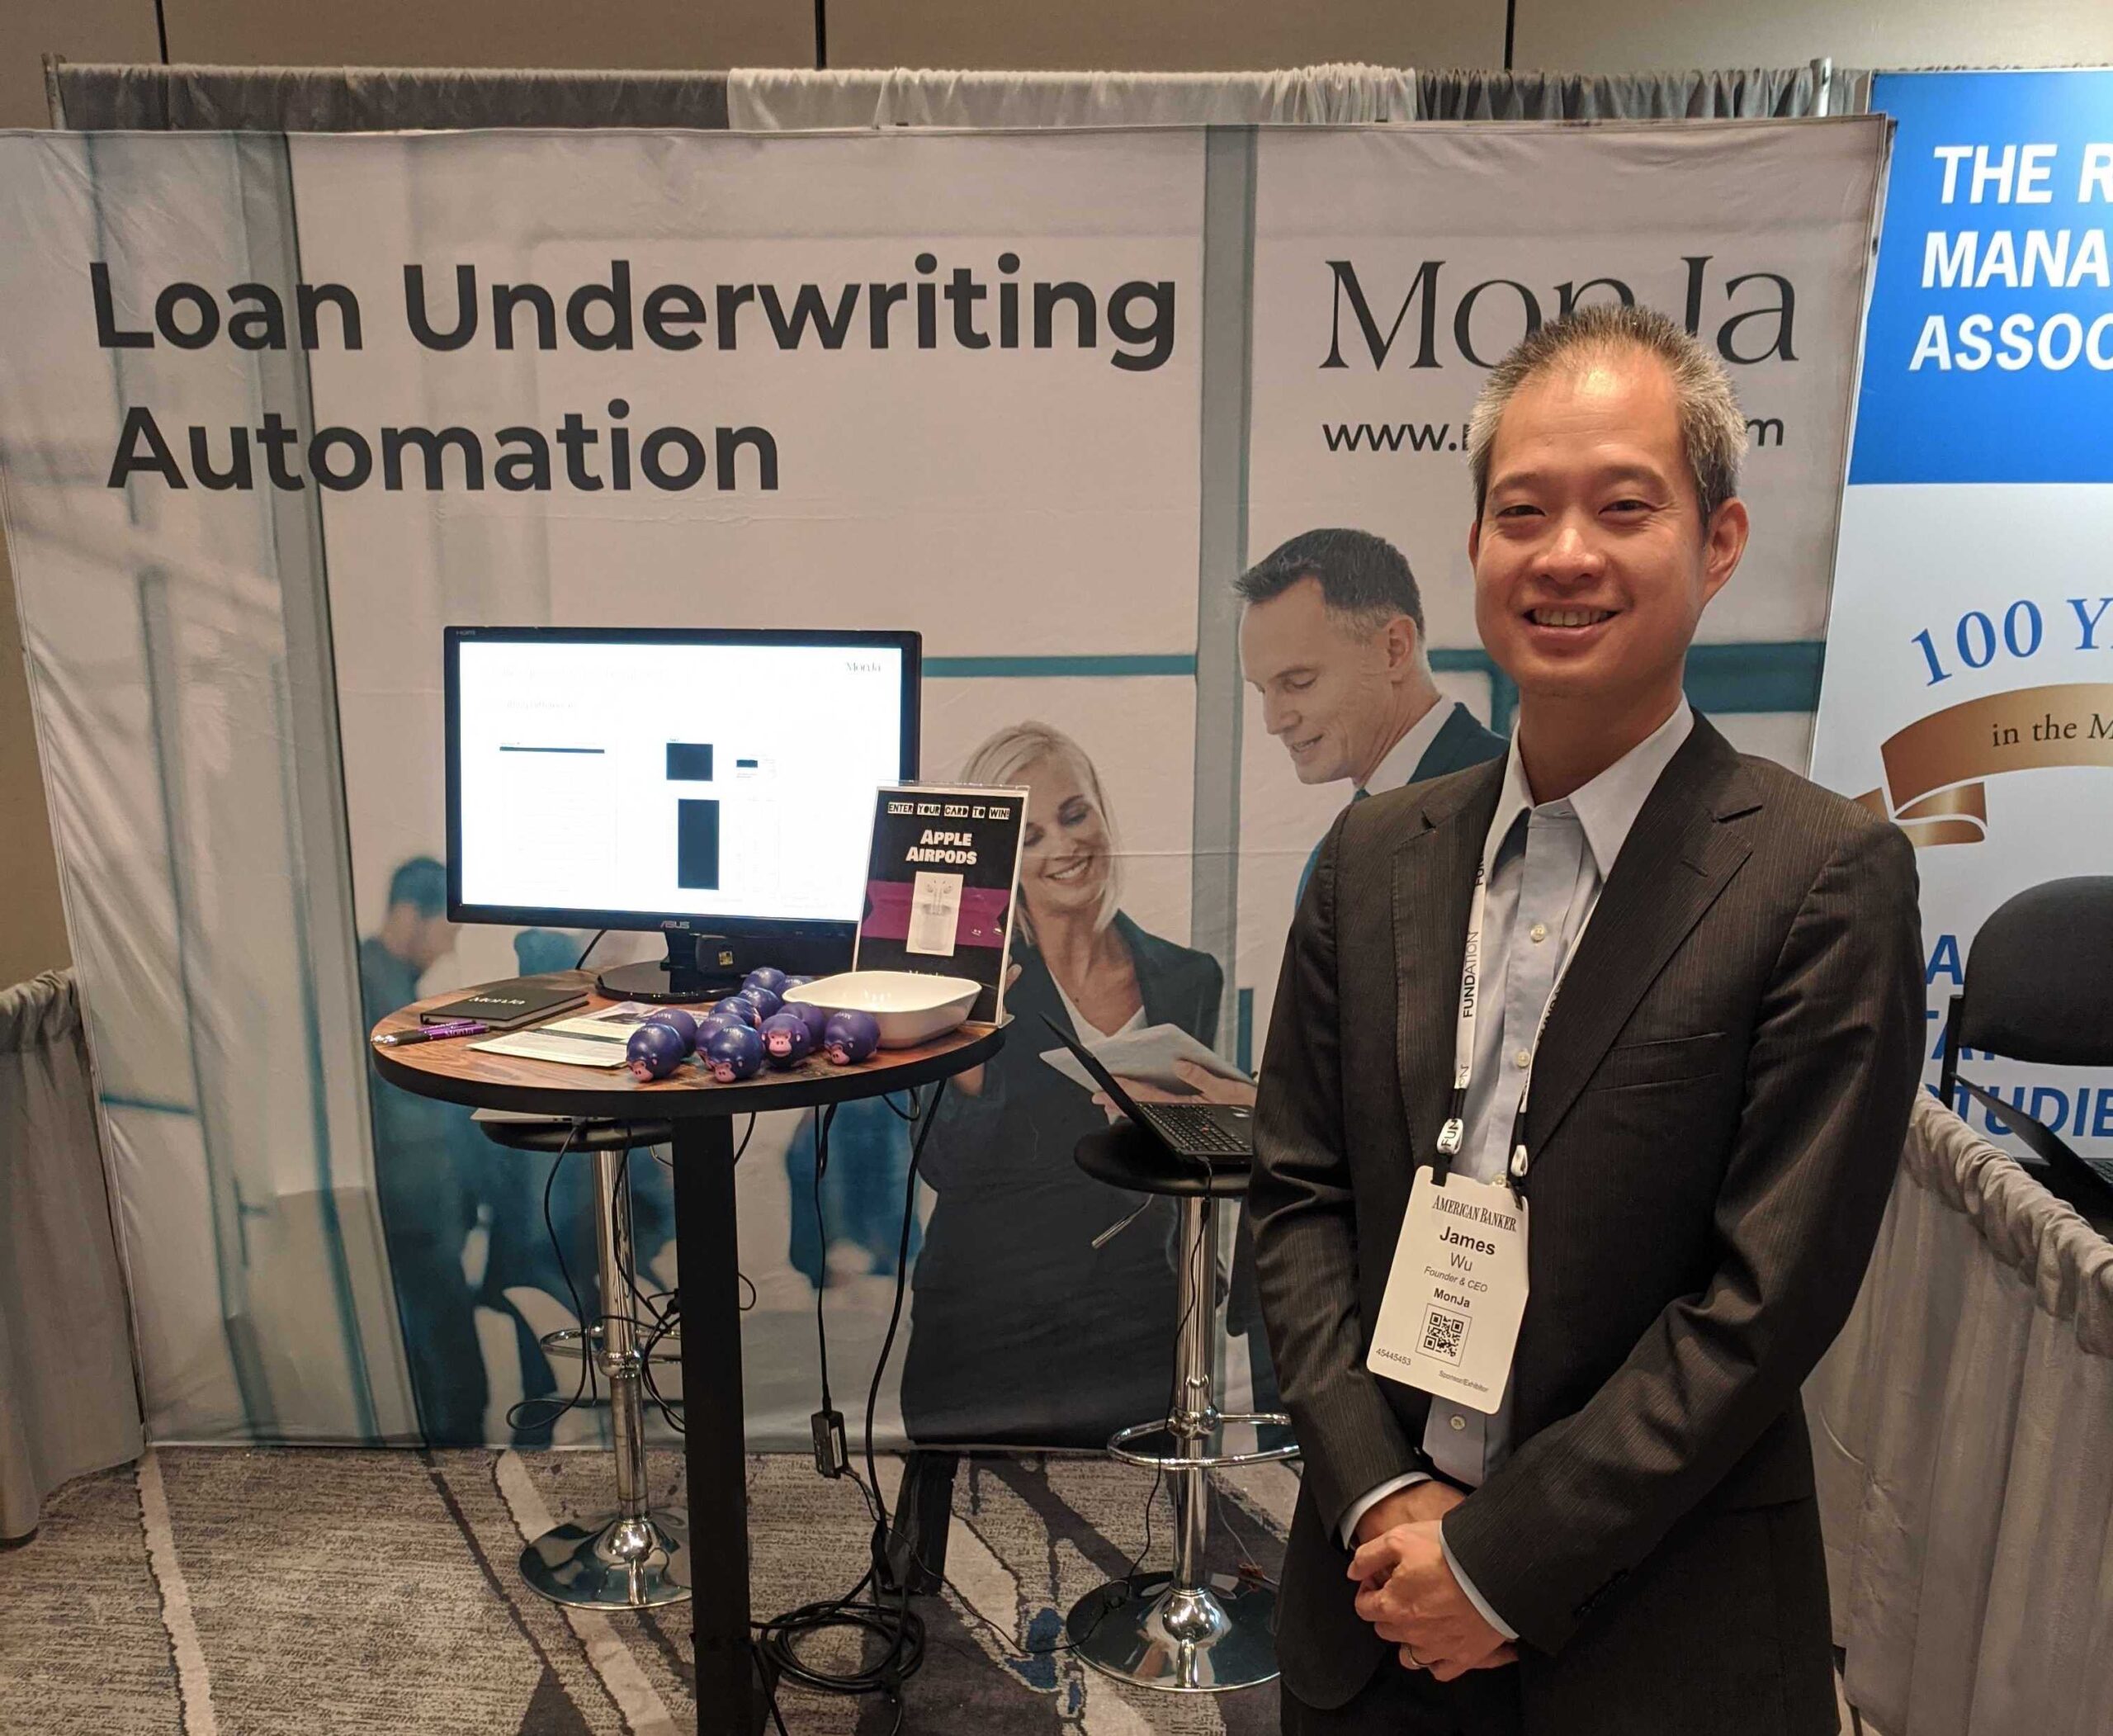 James Wu and MonJa's booth at Small Biz: Banking Conference in Los Angeles